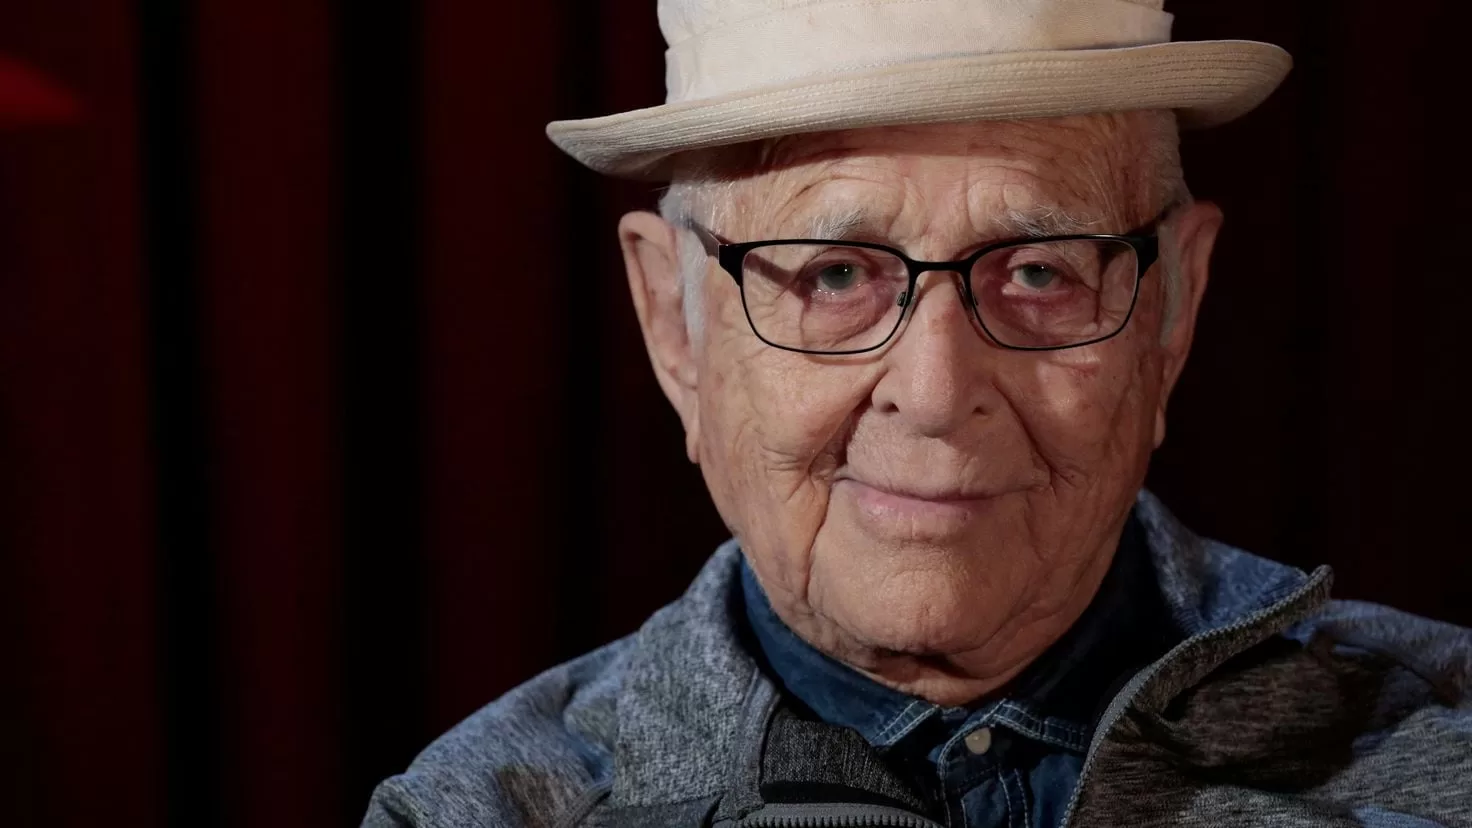 Norman Lear, the man who revolutionized television, dies at 101
